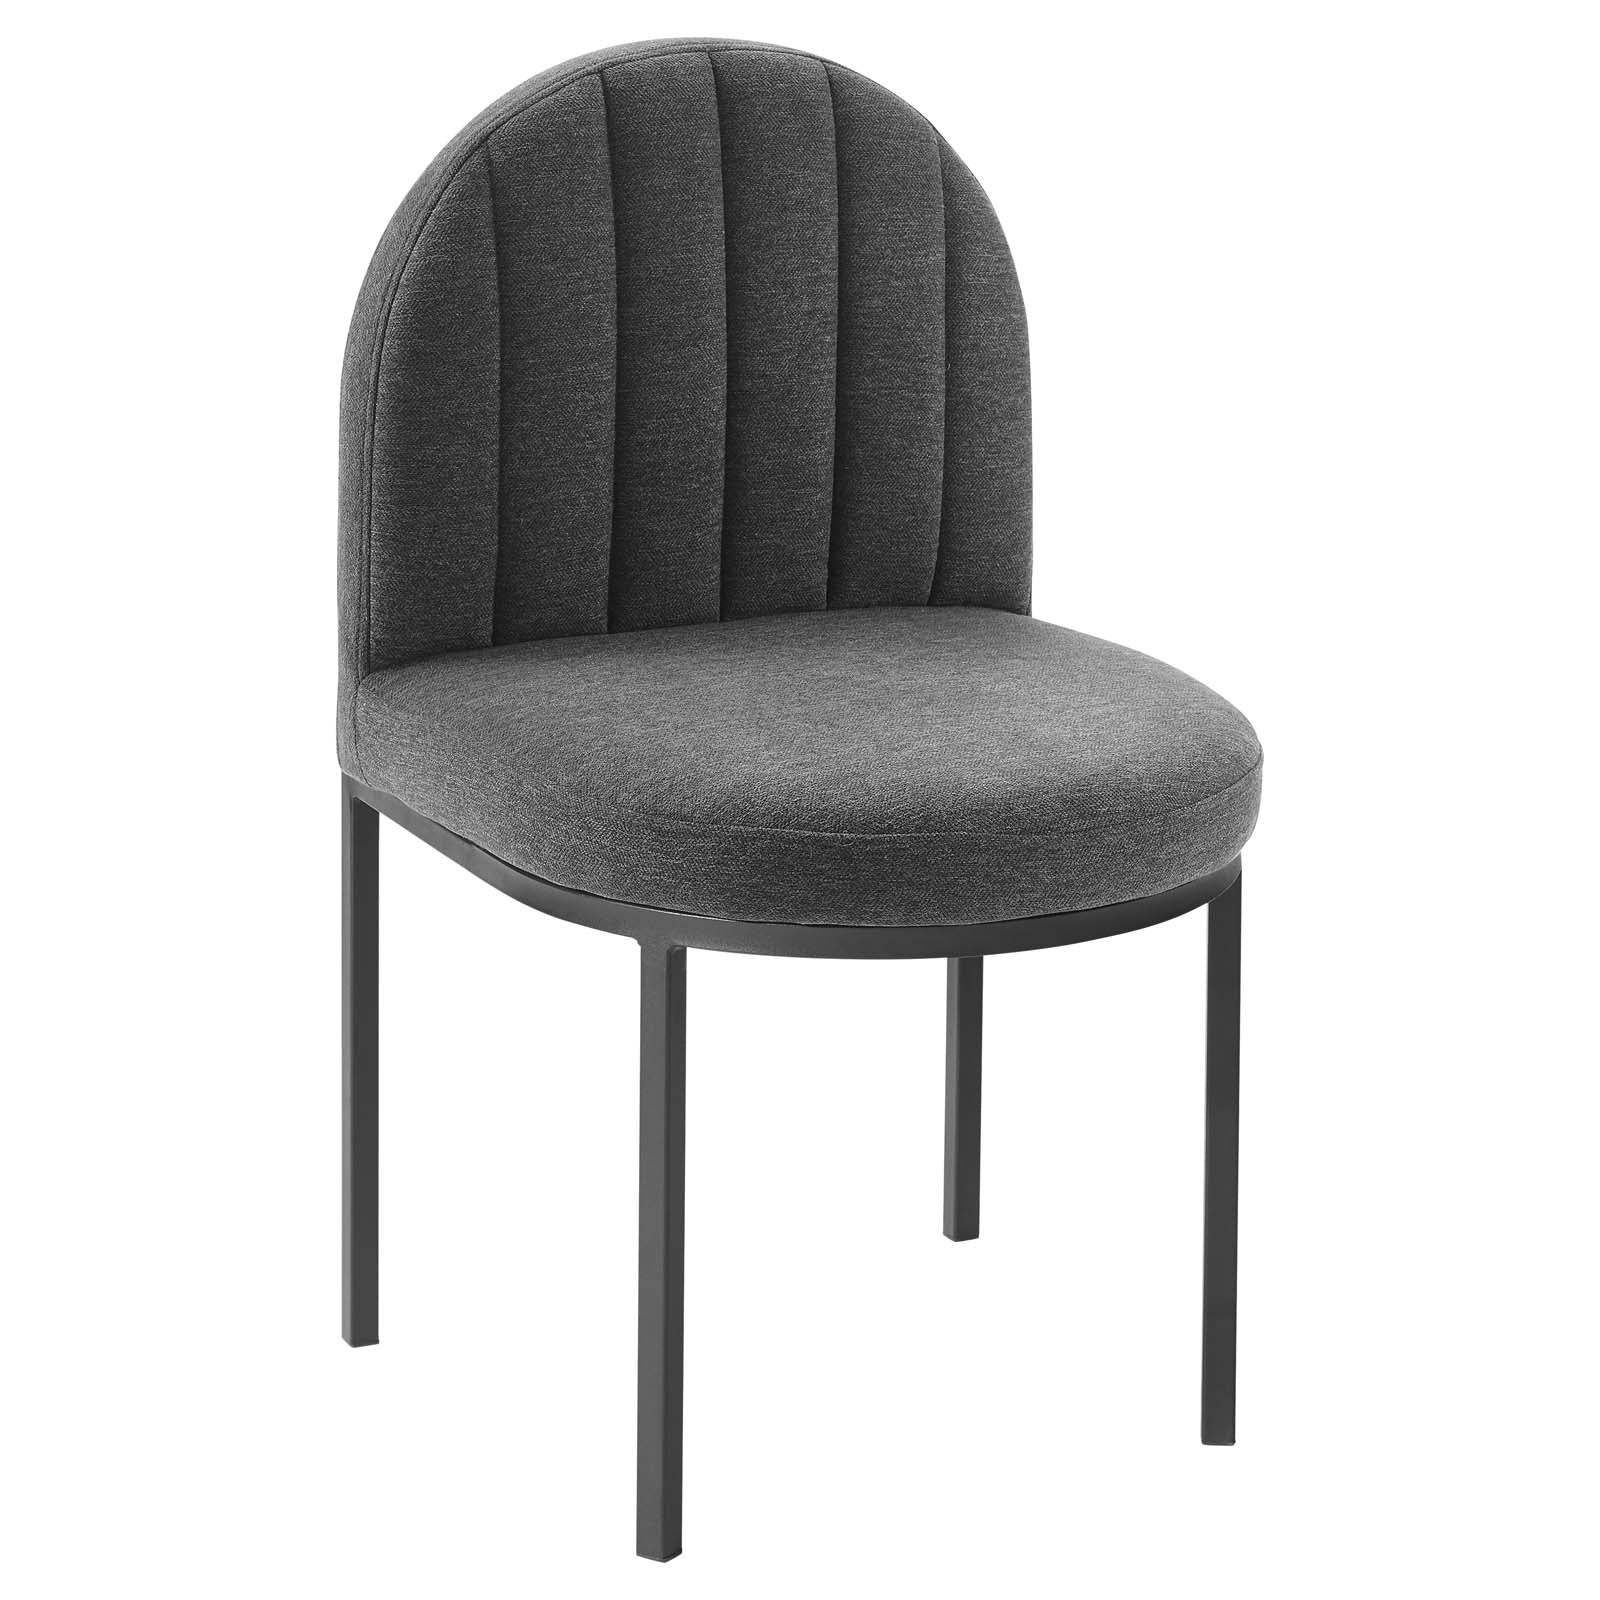 Modway Dining Chairs - Isla Channel Tufted Upholstered Fabric Dining Side Chair Black Charcoal